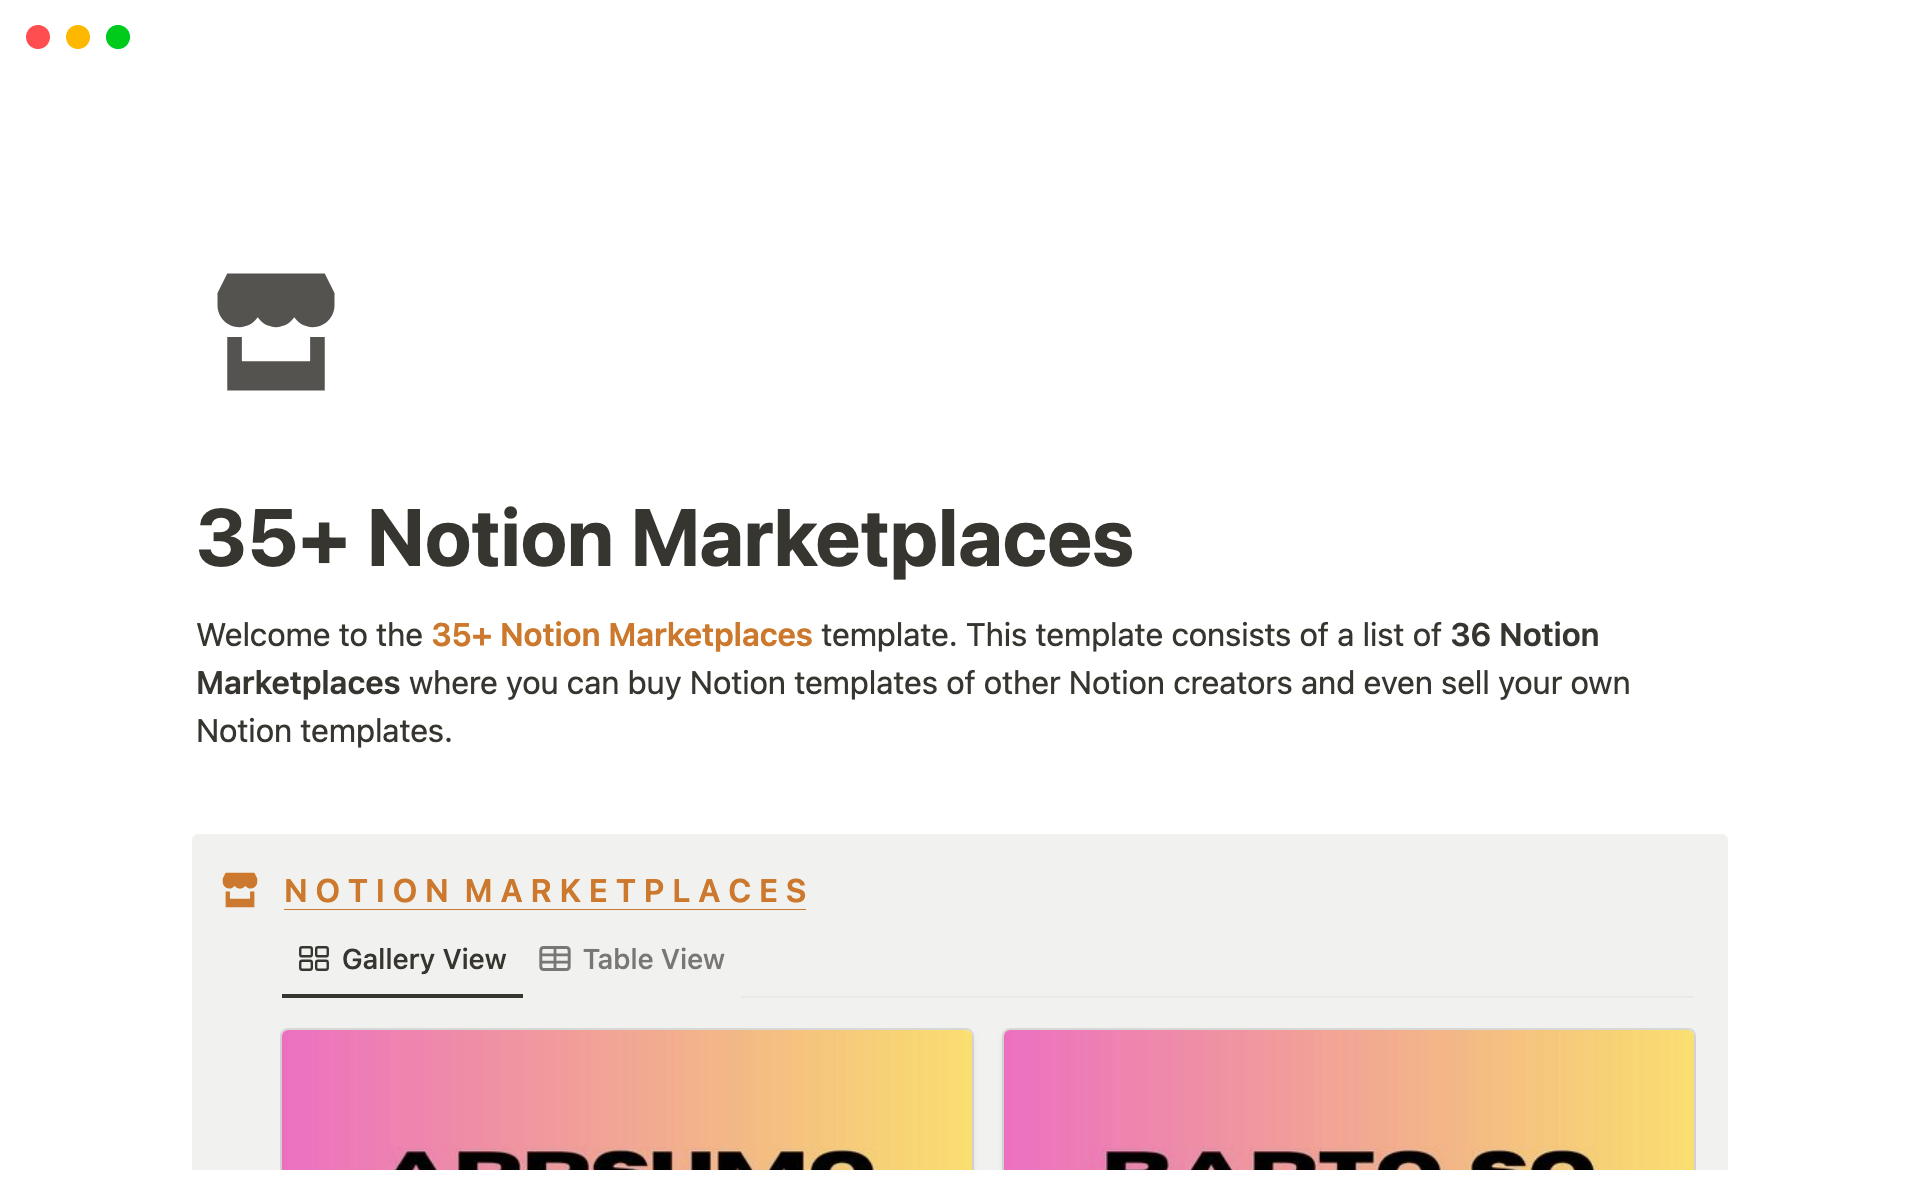 This template consists of a list of 35+ Notion Marketplaces where you can buy Notion templates of other Notion creators and even sell your own Notion templates.